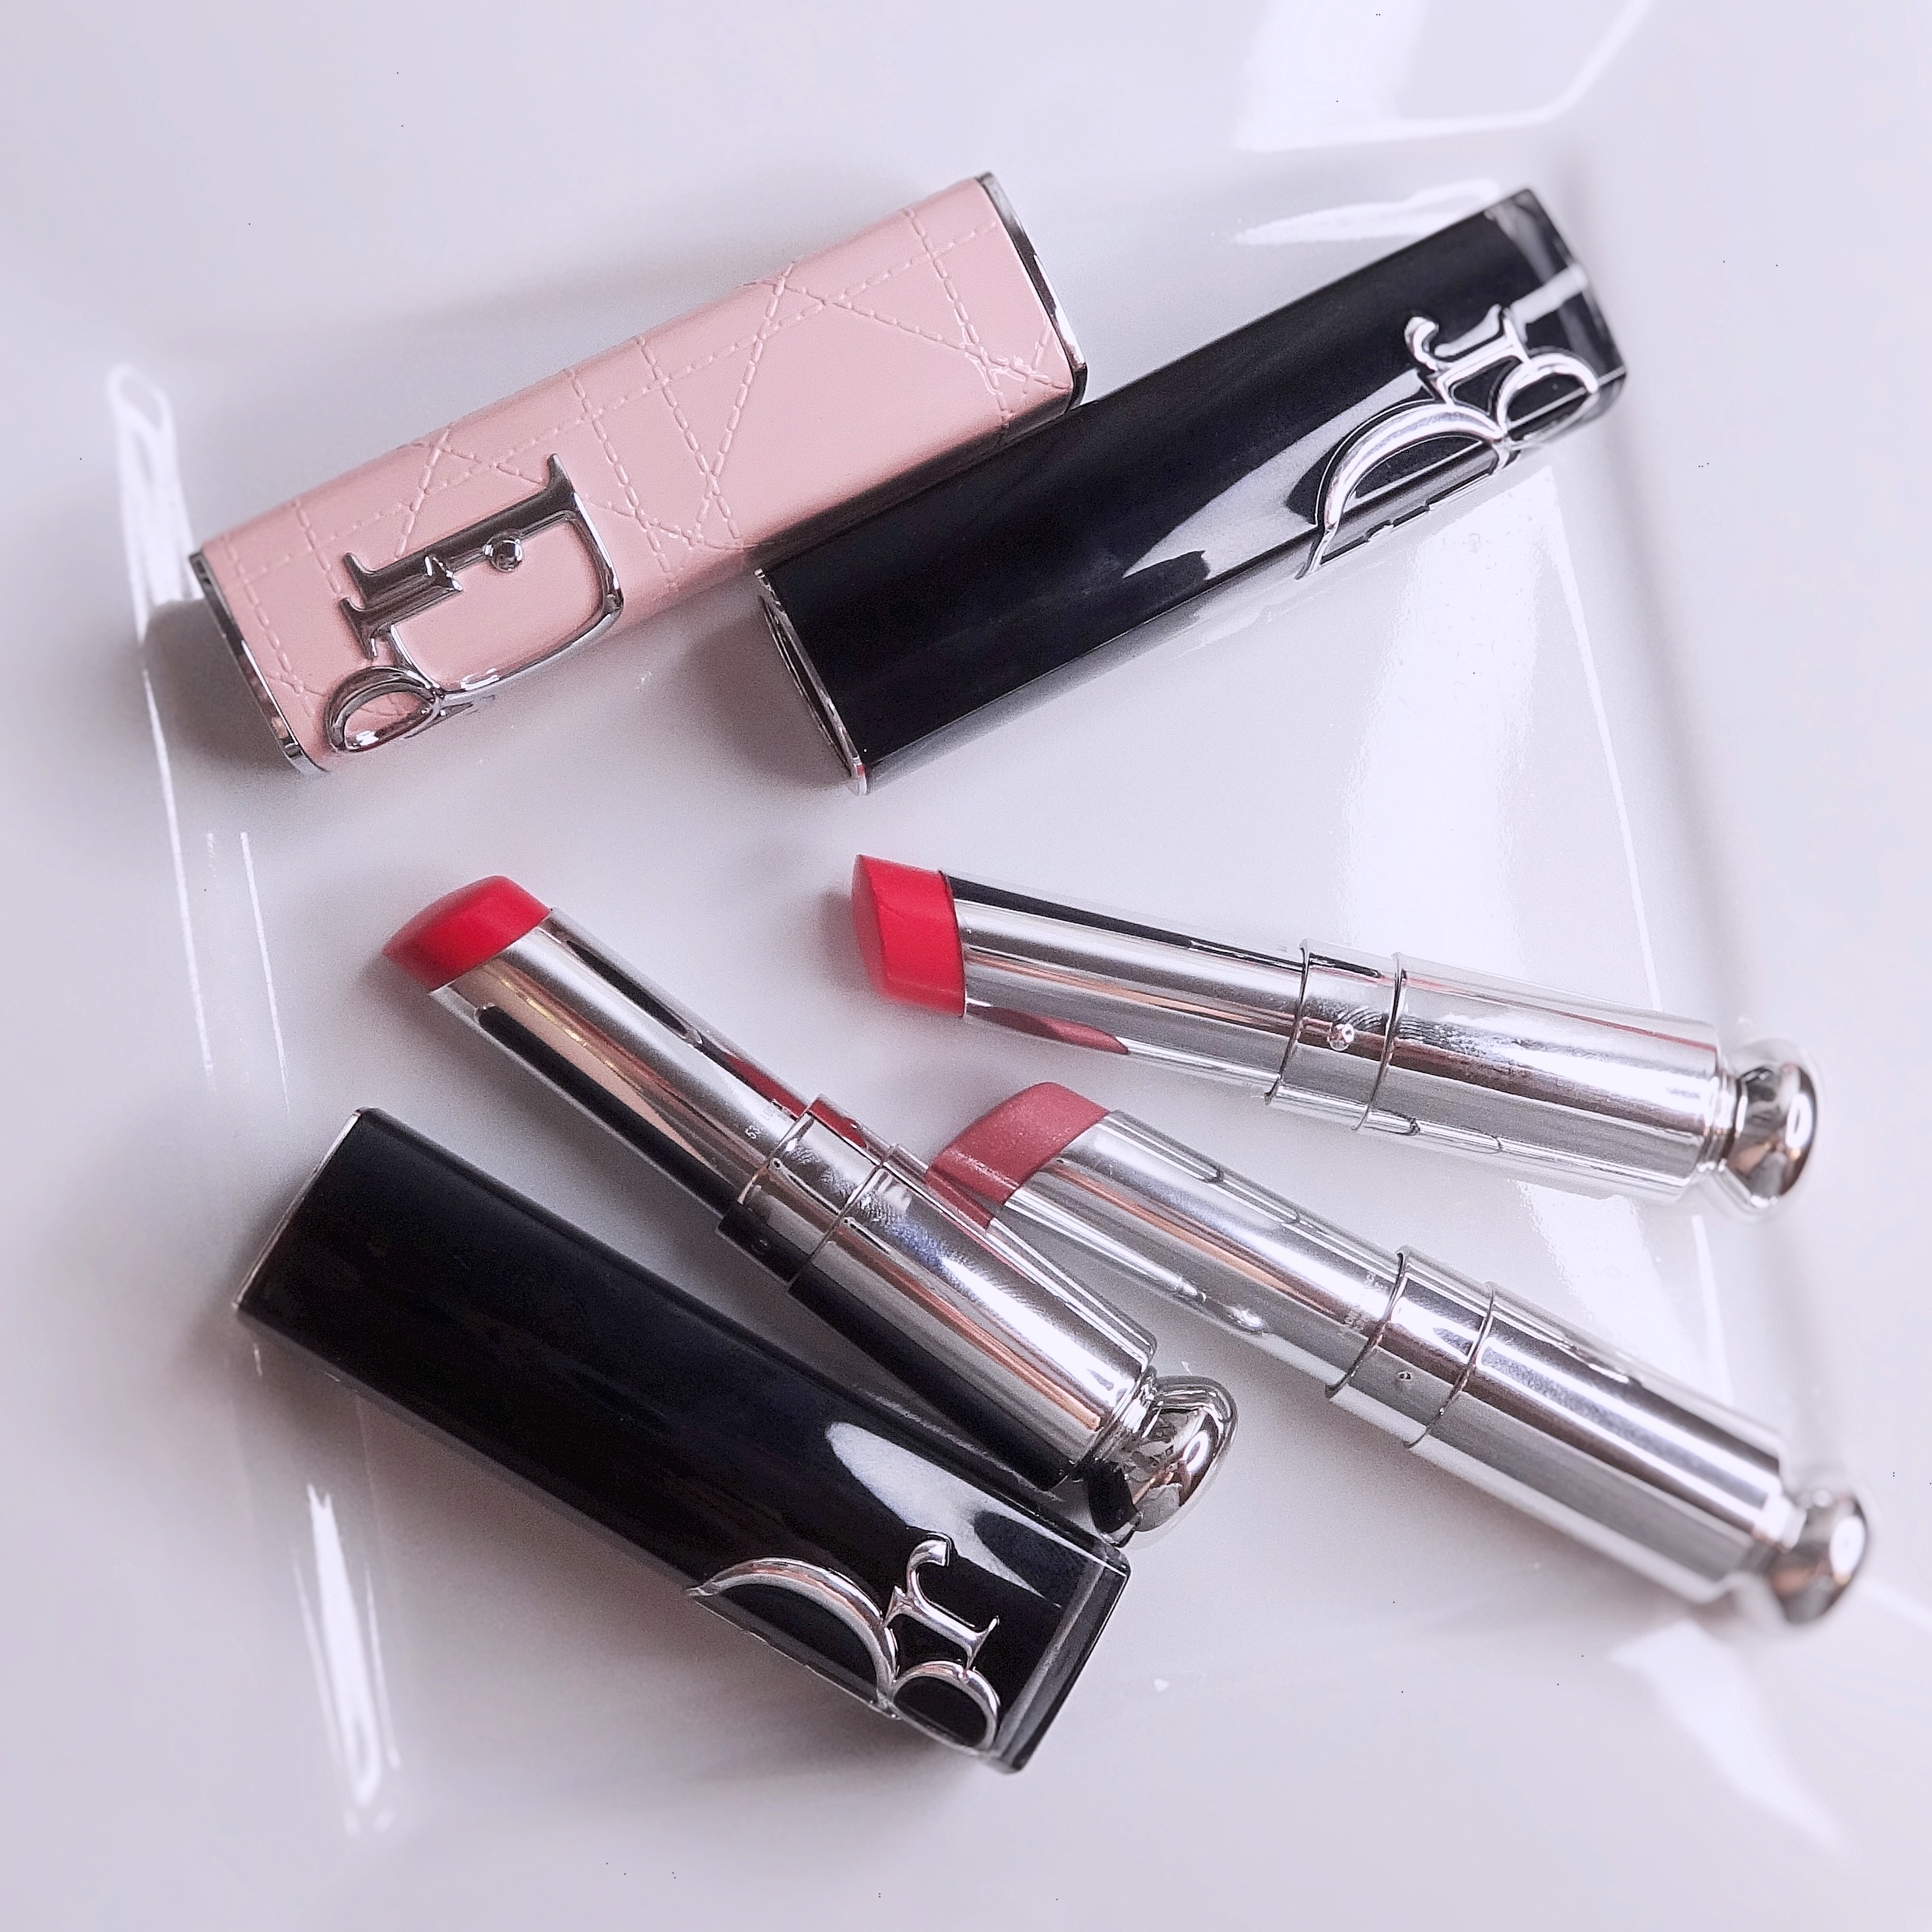 Dior Addict Refillable Lipstick review swatches